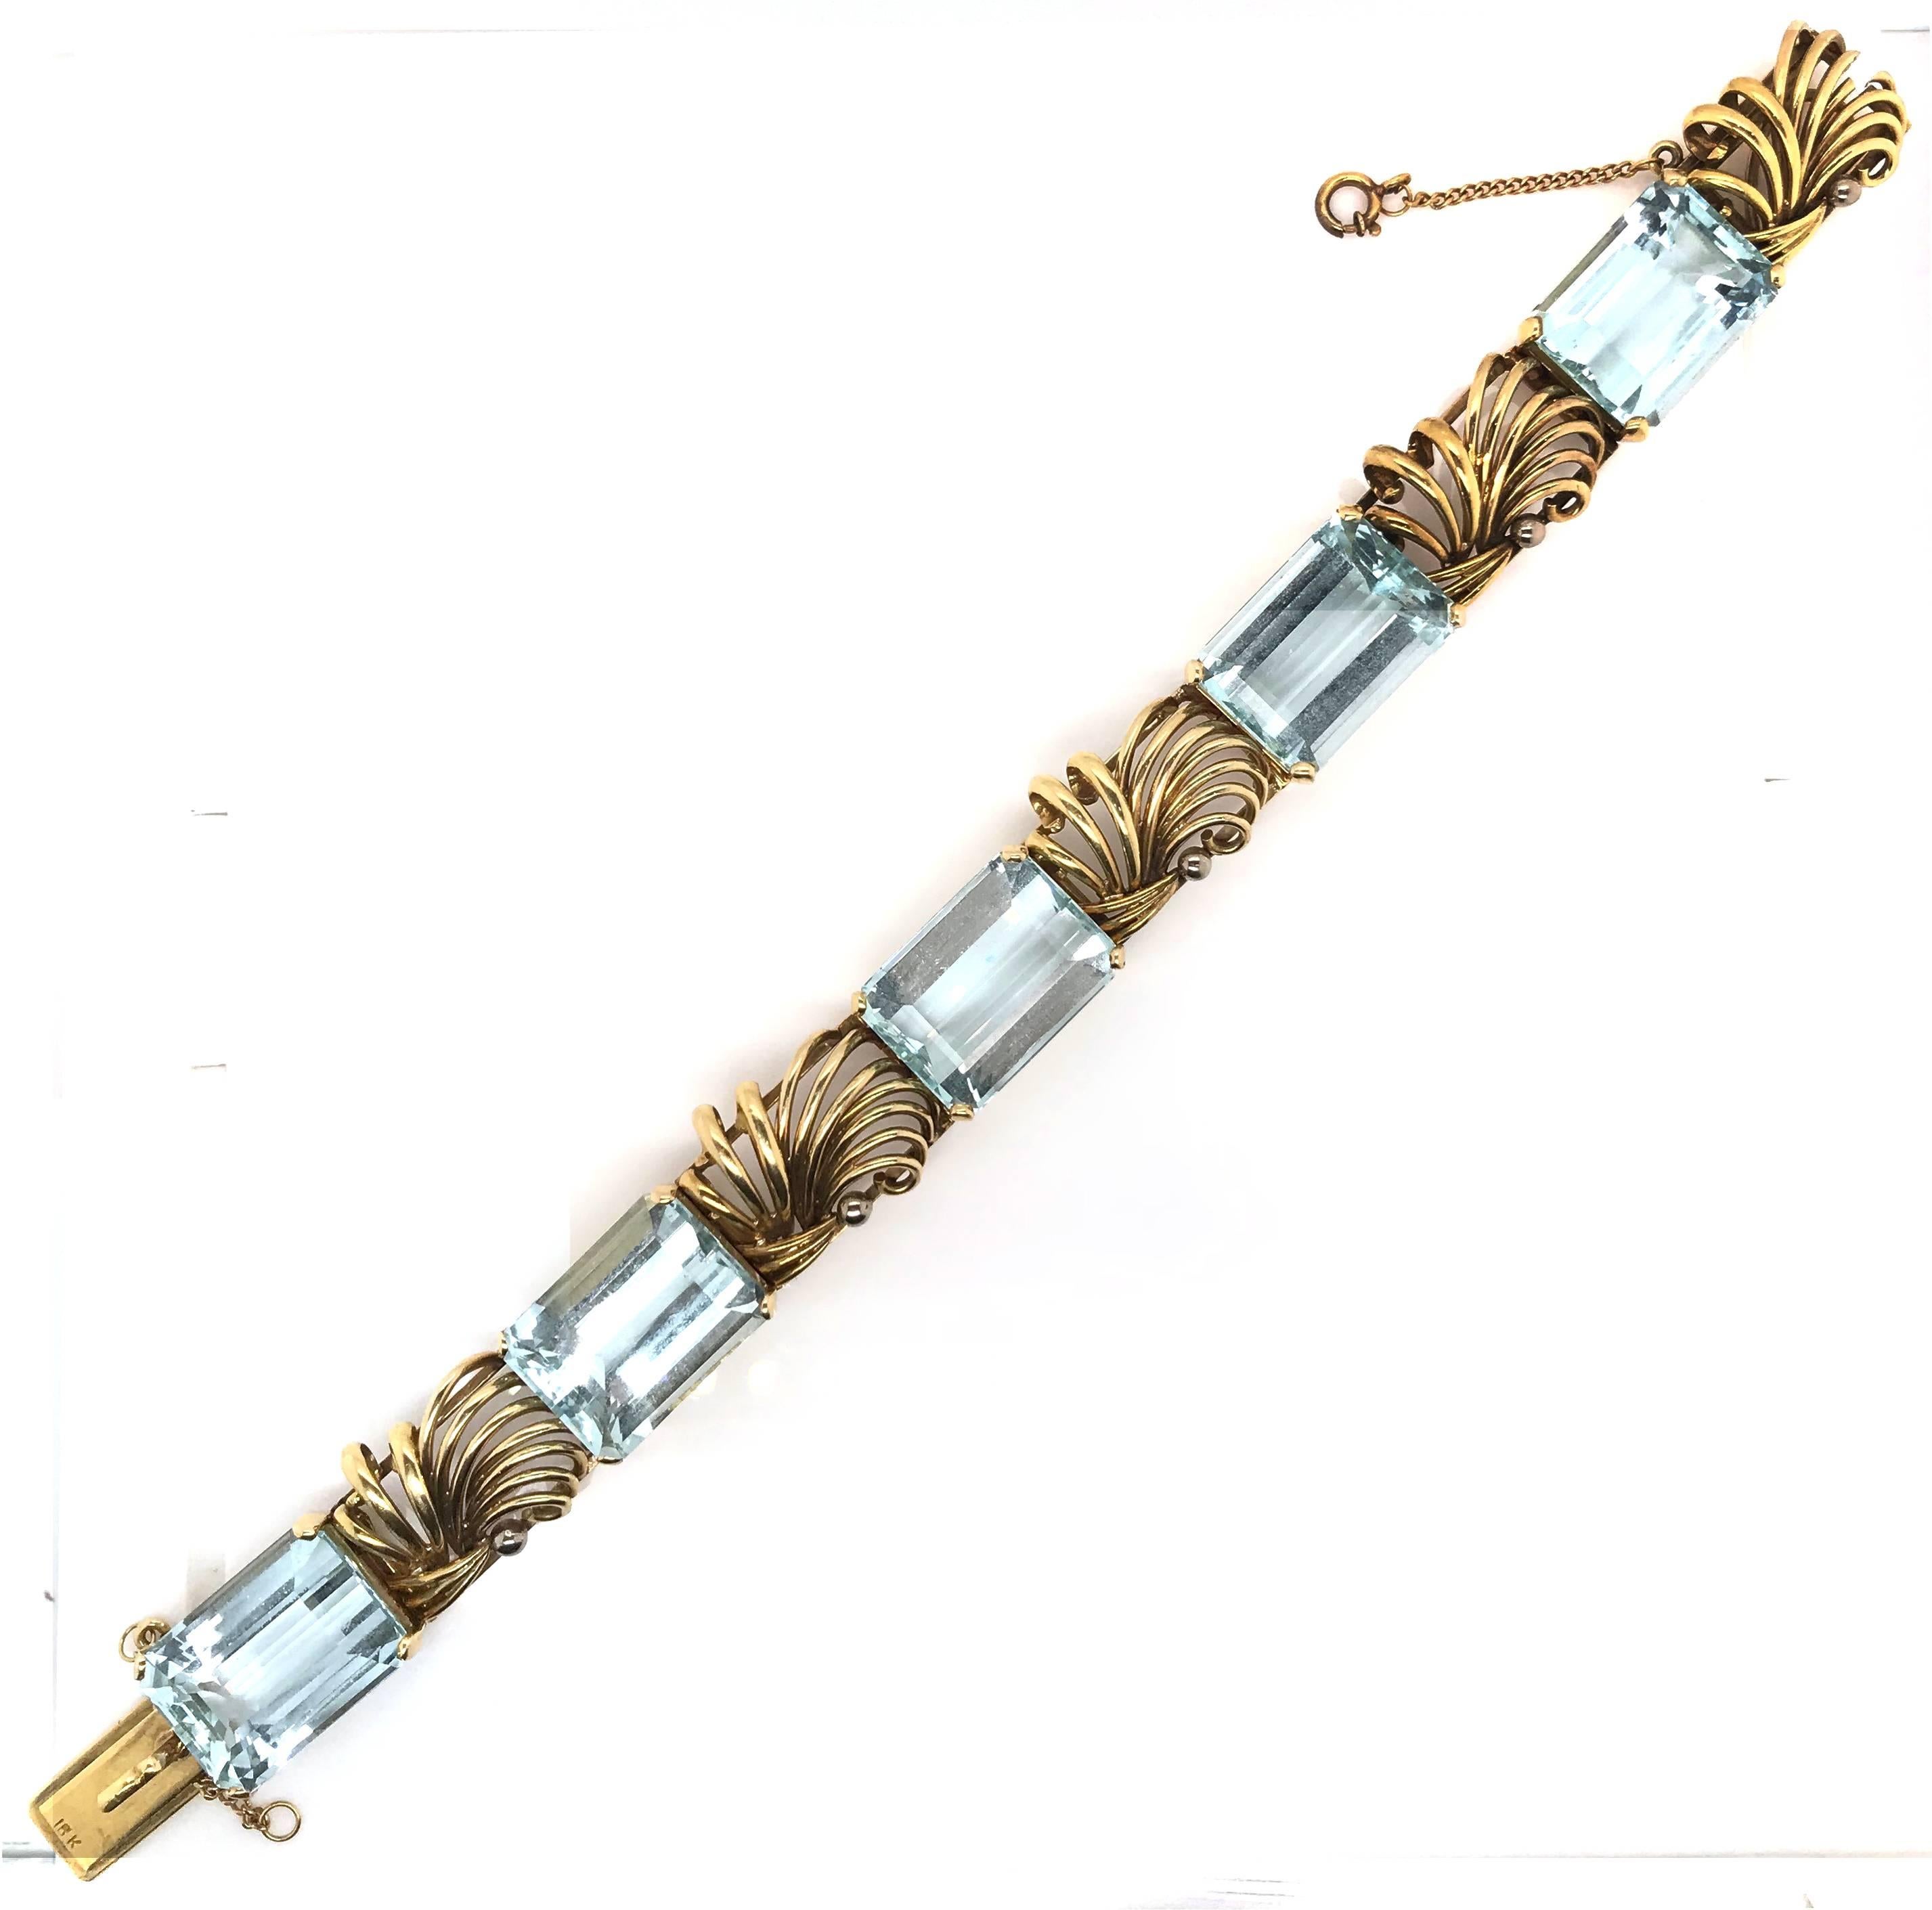 Featuring a Yellow Gold Vintage Retro Bracelet of alternating swirl wire links wide and claw set with 5 Emerald Cut Aquamarines. Each Aquamarine is 13 Carats.

Estimated Total Aquamarine weight - 65 Carats
Total Weight of the piece - 54 Grams